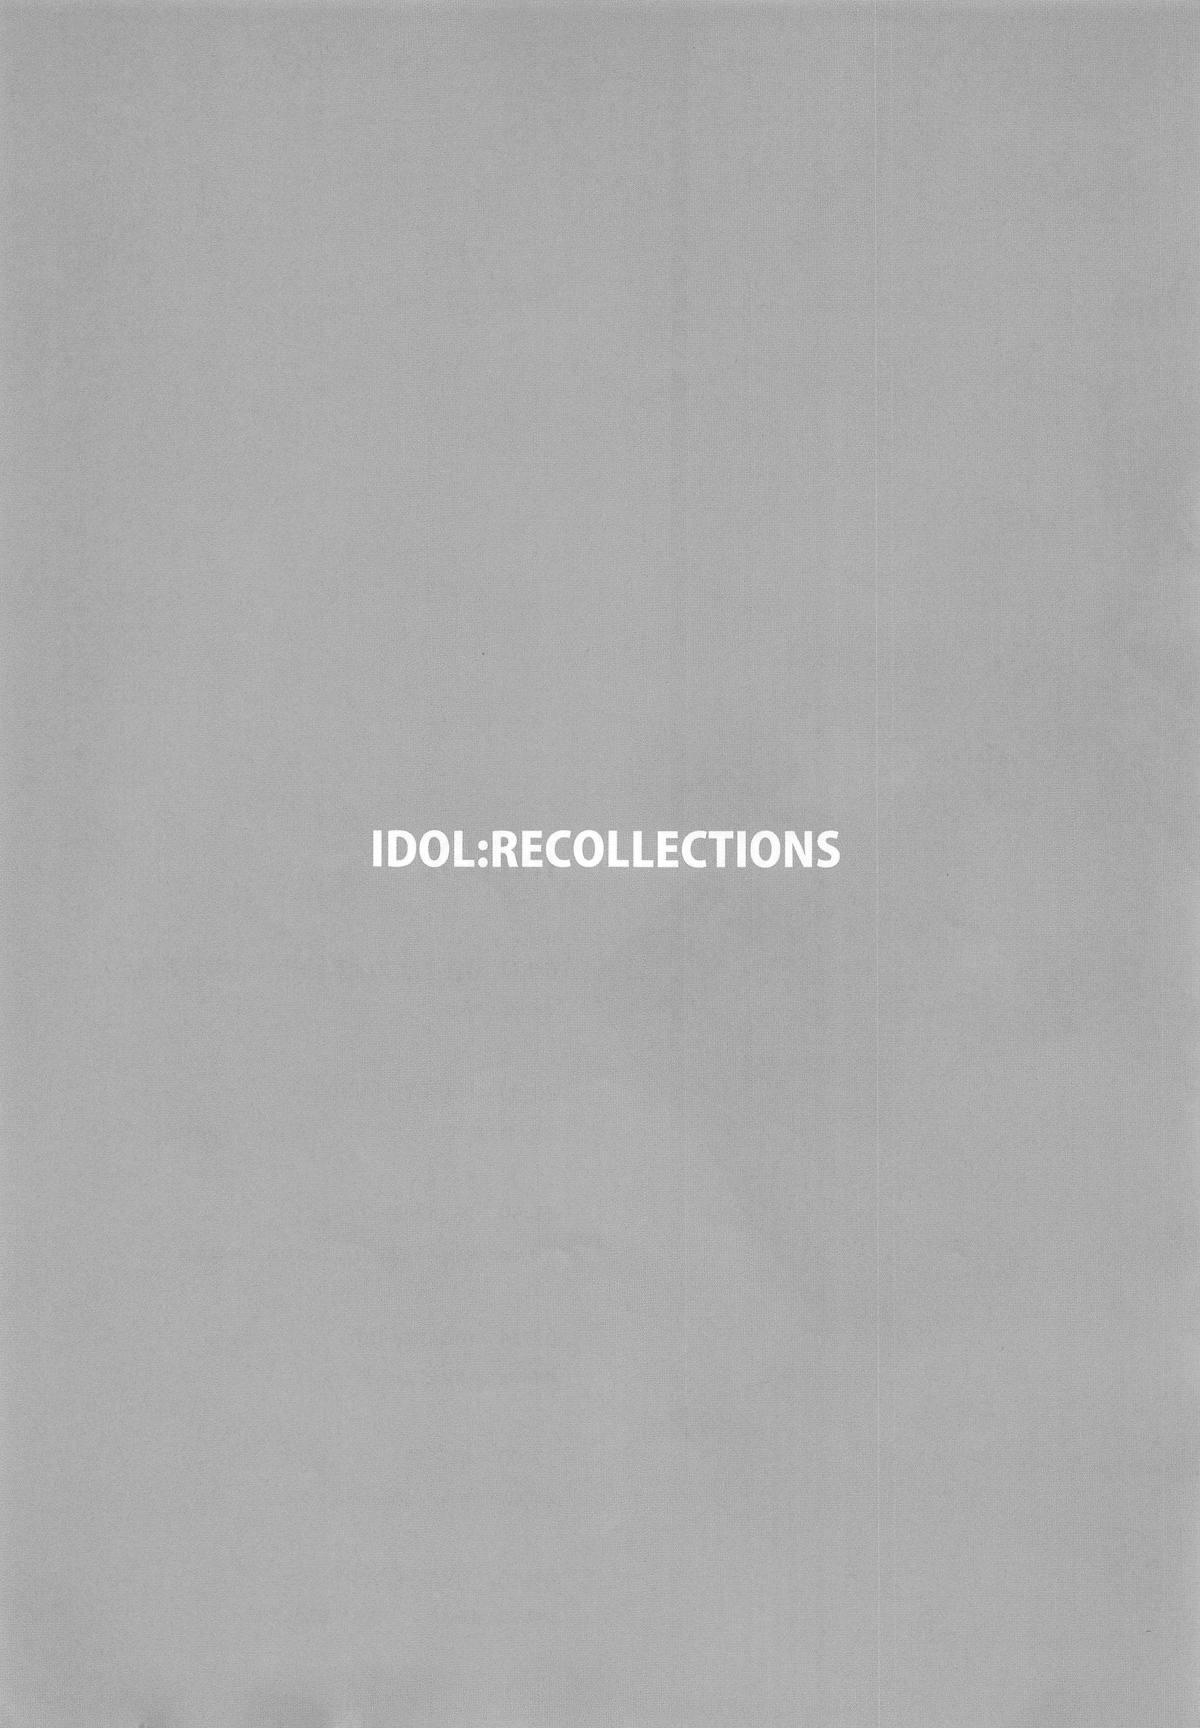 lDOL:RECOLLECTlONS 1